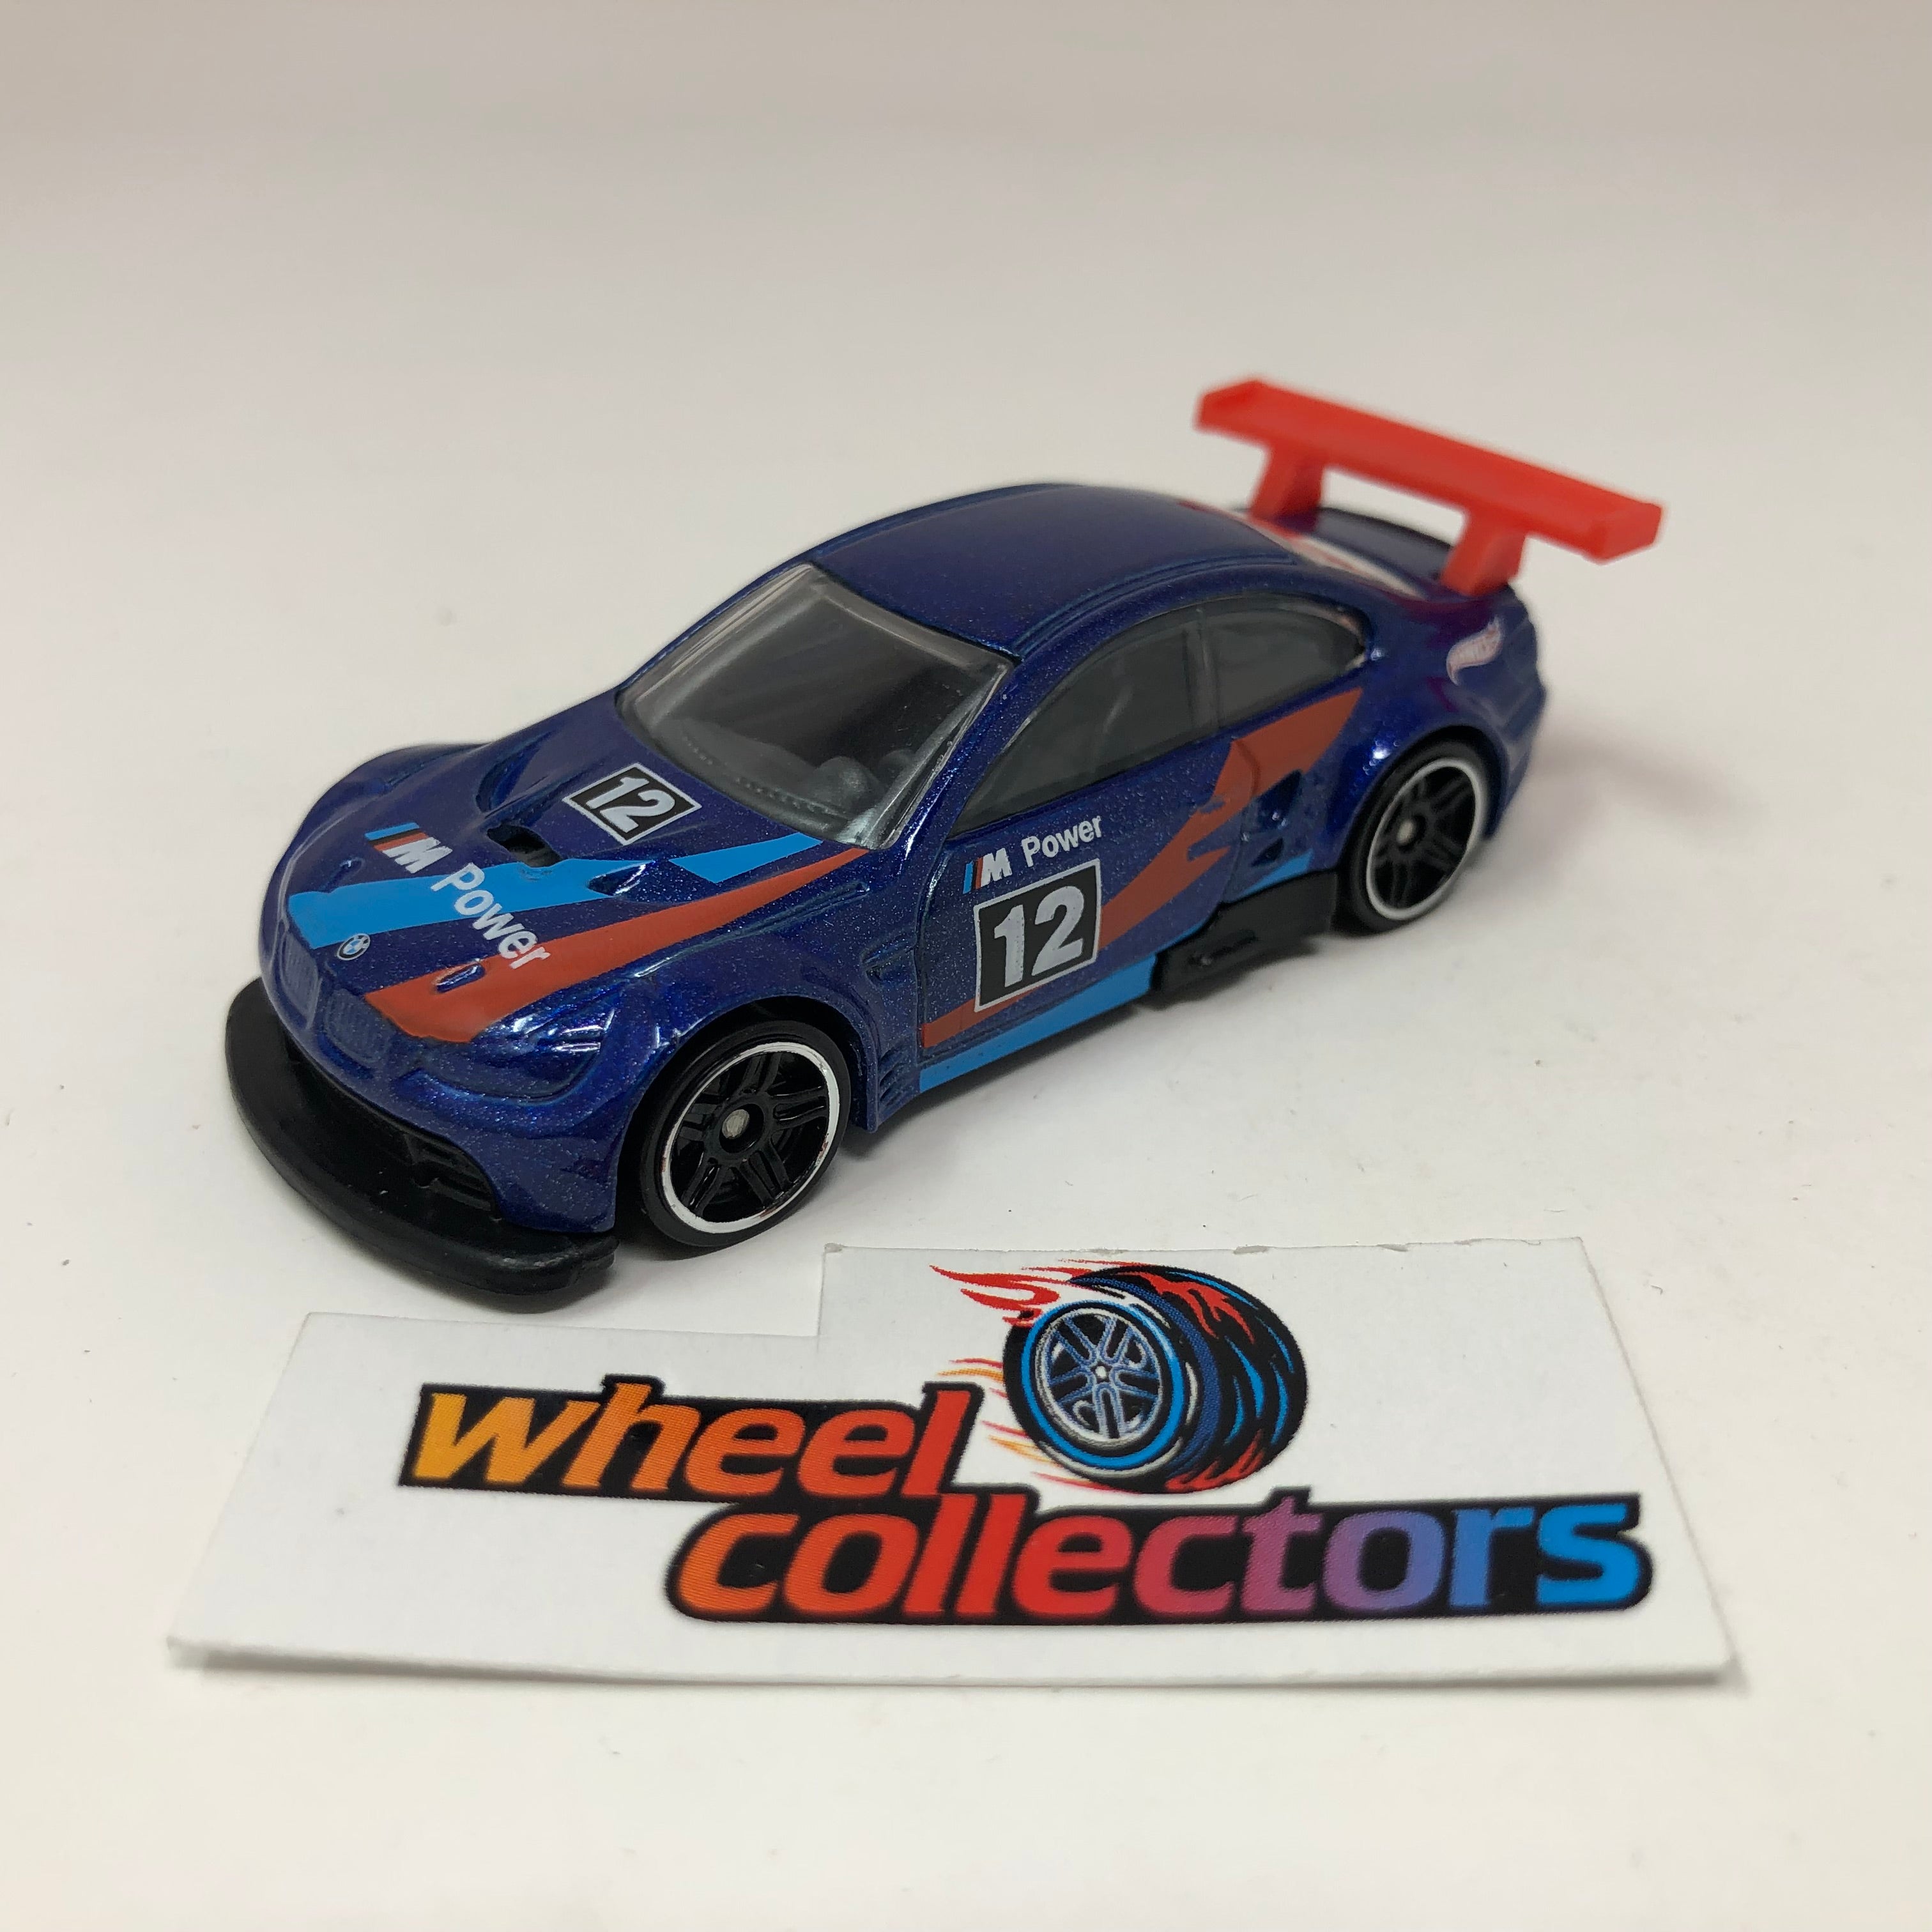 Collection Hot Wheels Cars, Hot Wheels Bmw M3 Gt2